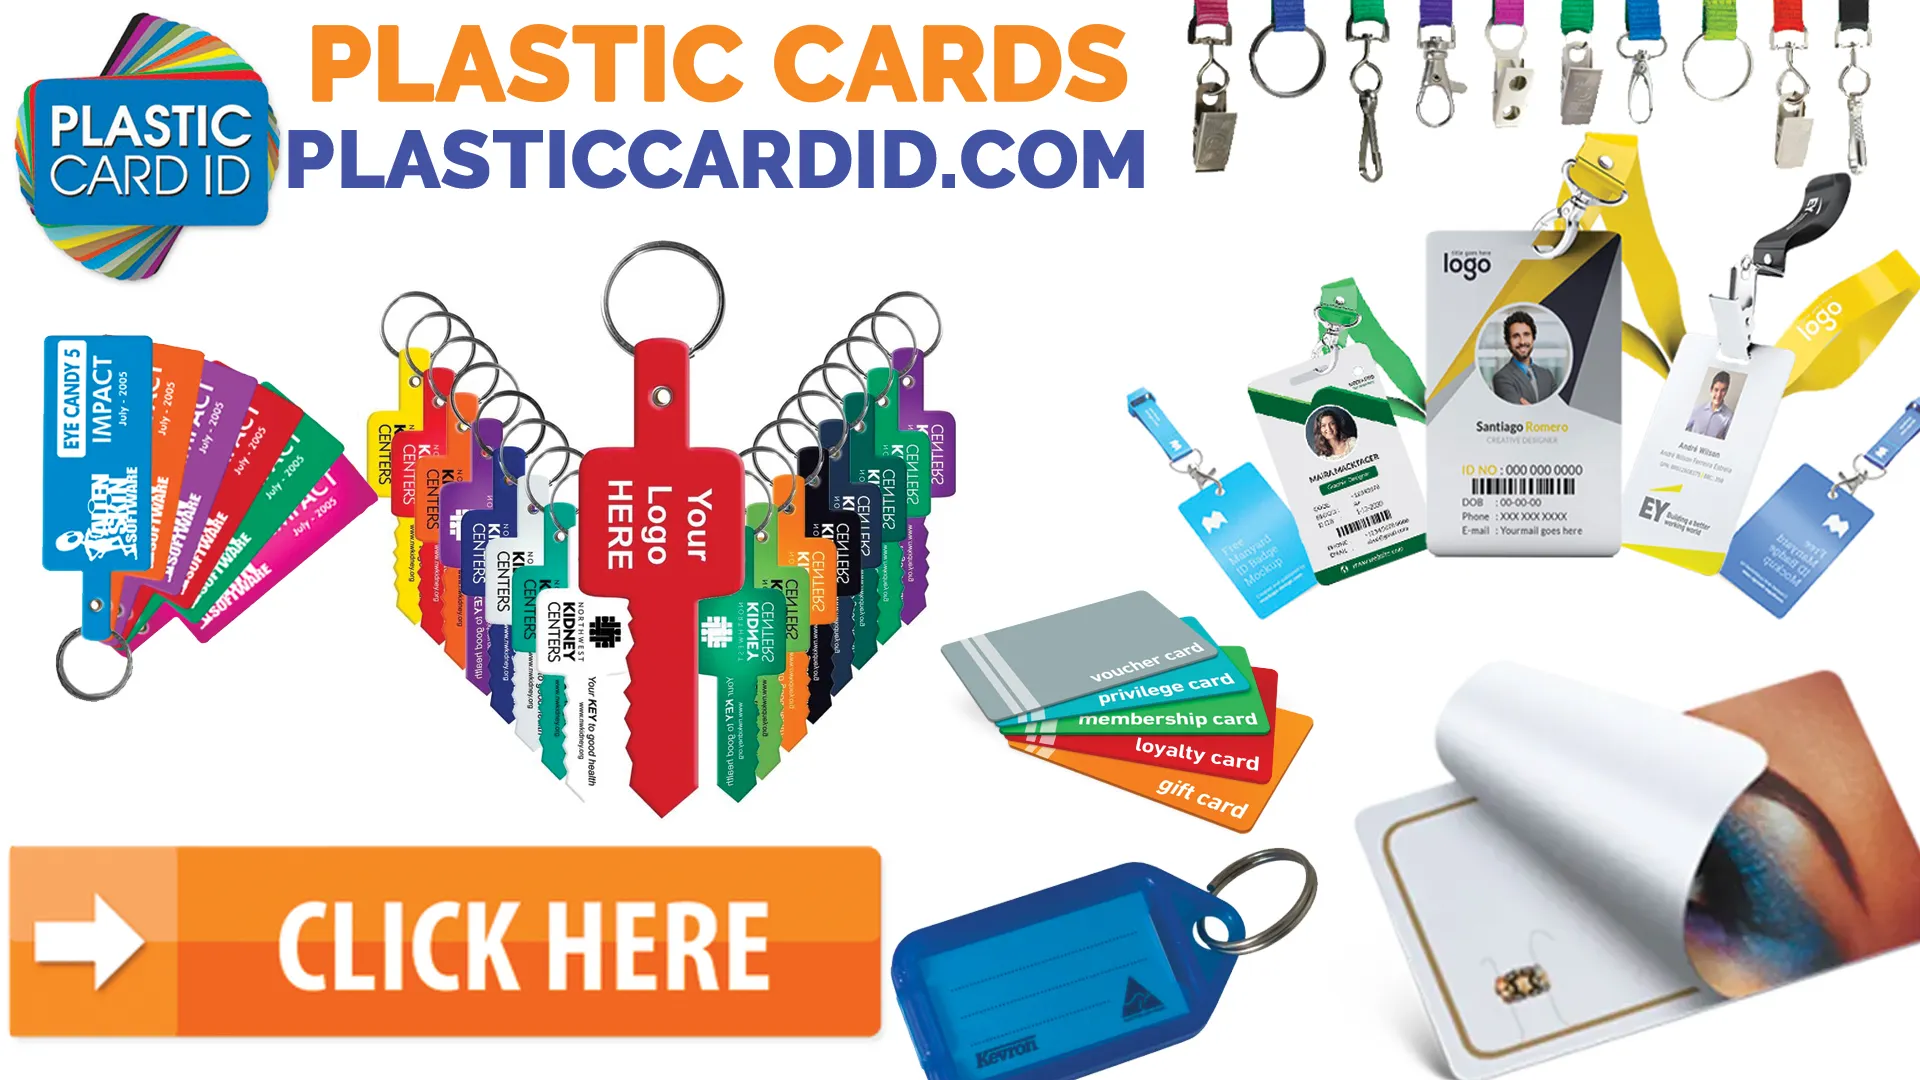 Welcome to Plastic Card ID




: Your Partner in Plastic Card Printing Excellence